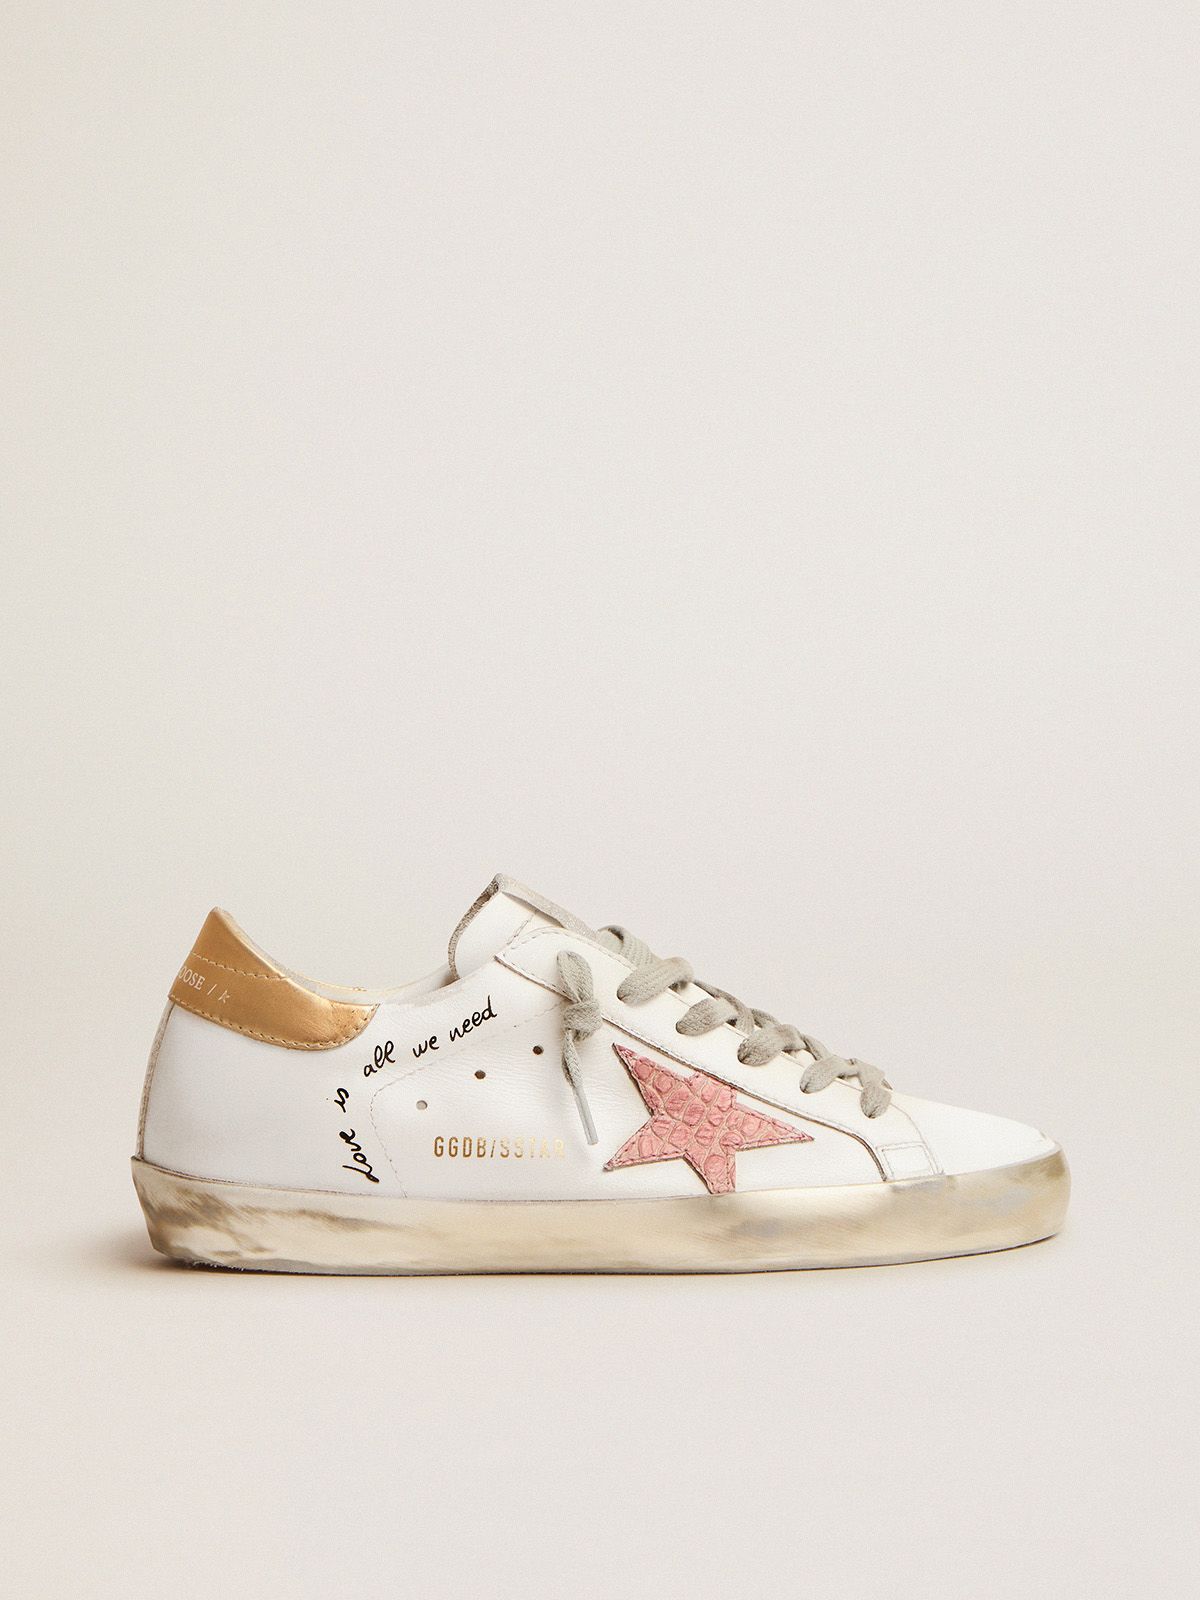 Super-Star sneakers with handwritten lettering and crocodile-print leather stars